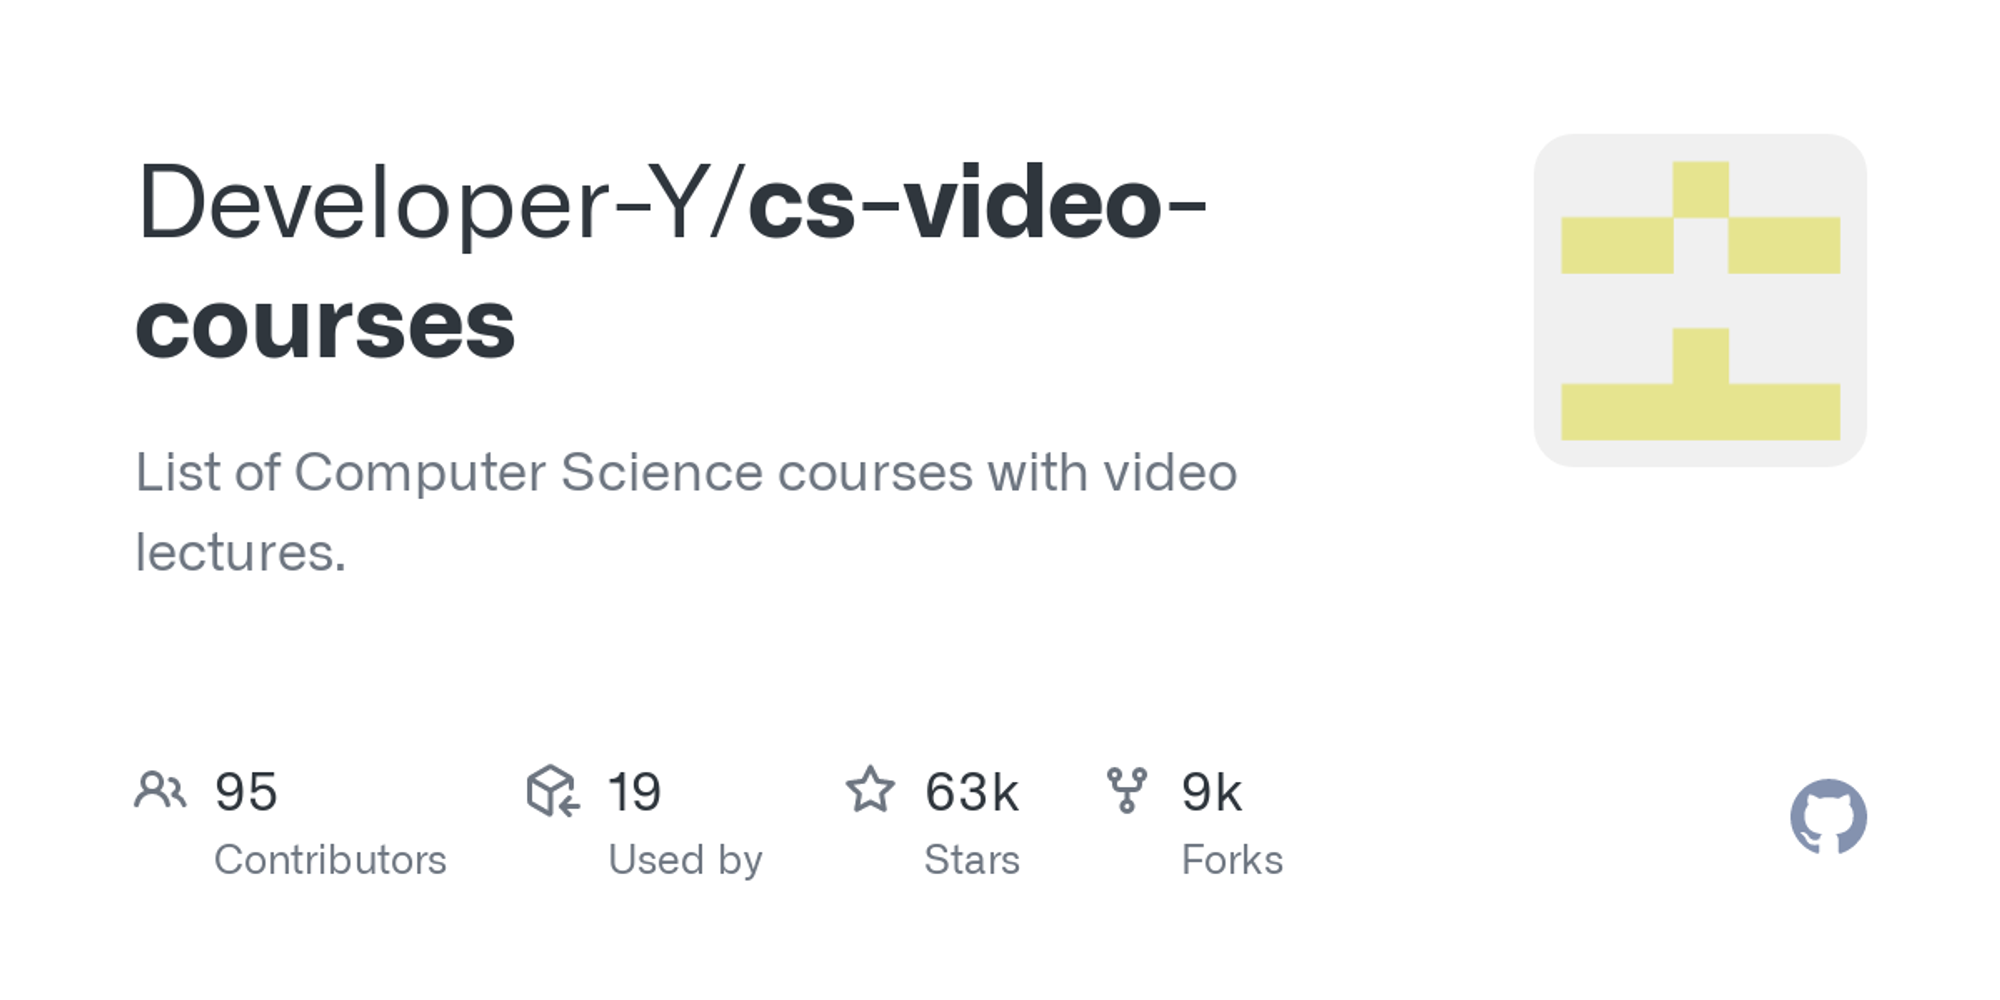 GitHub - Developer-Y/cs-video-courses: List of Computer Science courses with video lectures.